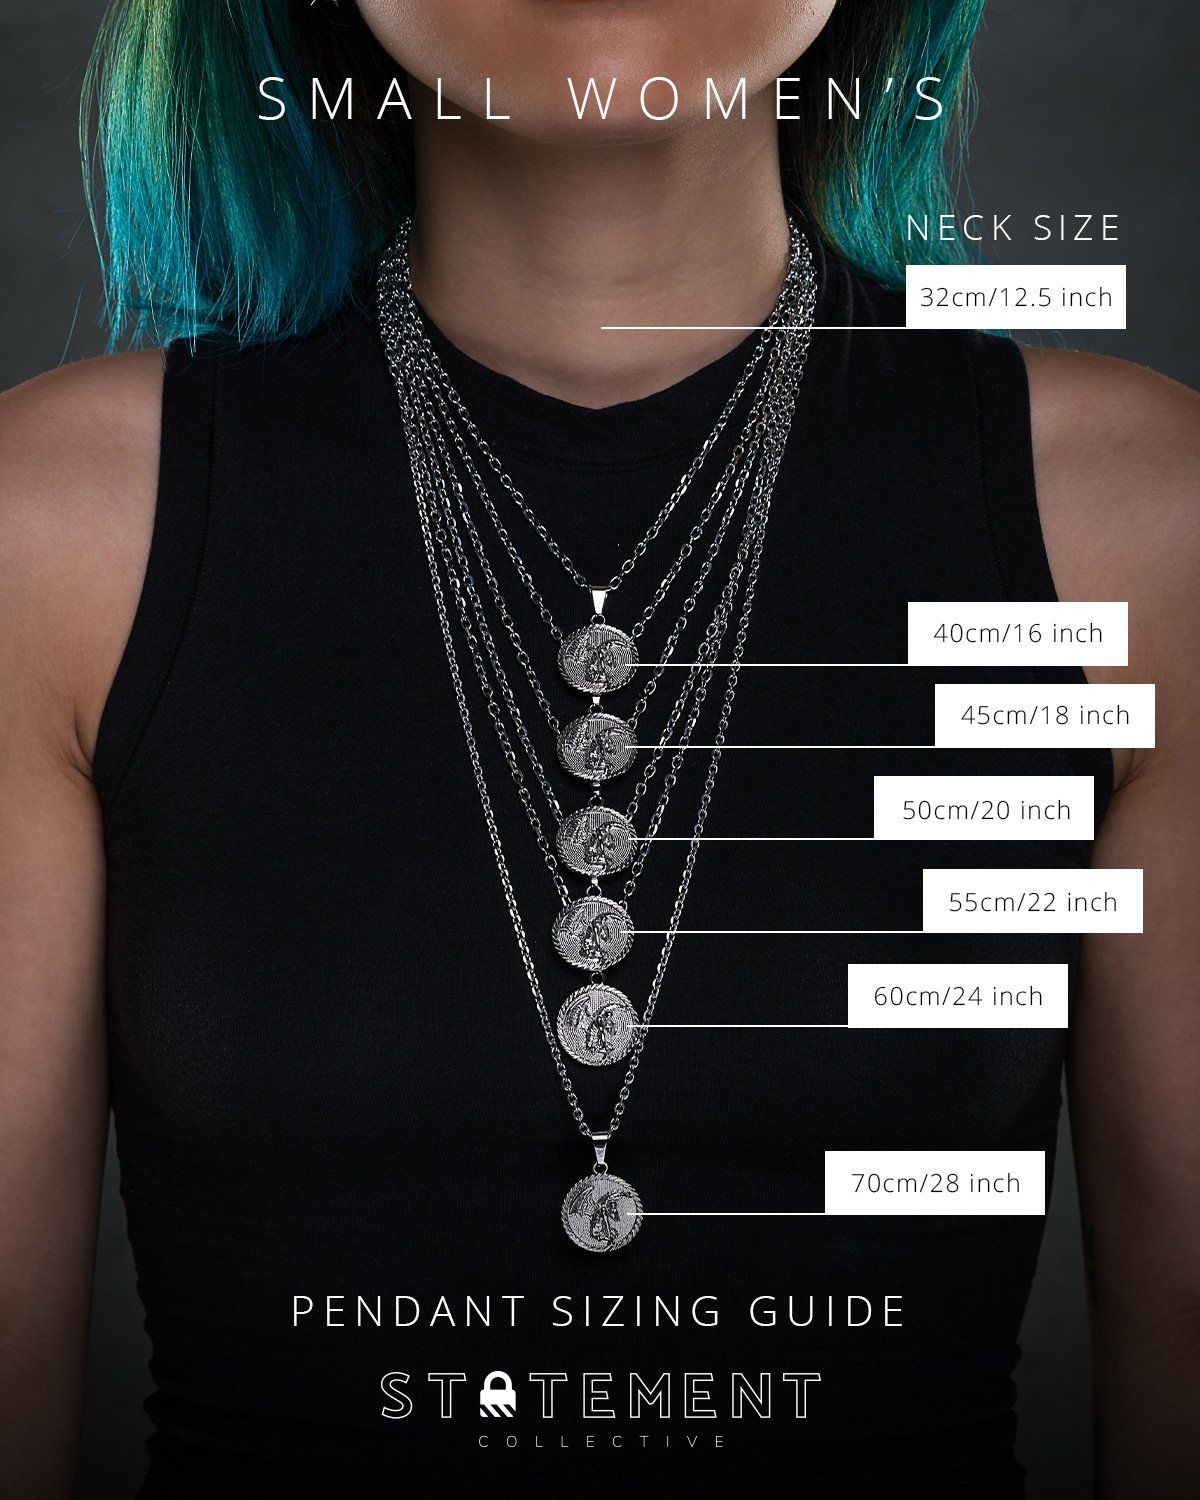 Pendant necklace sizing guide for small neck women 